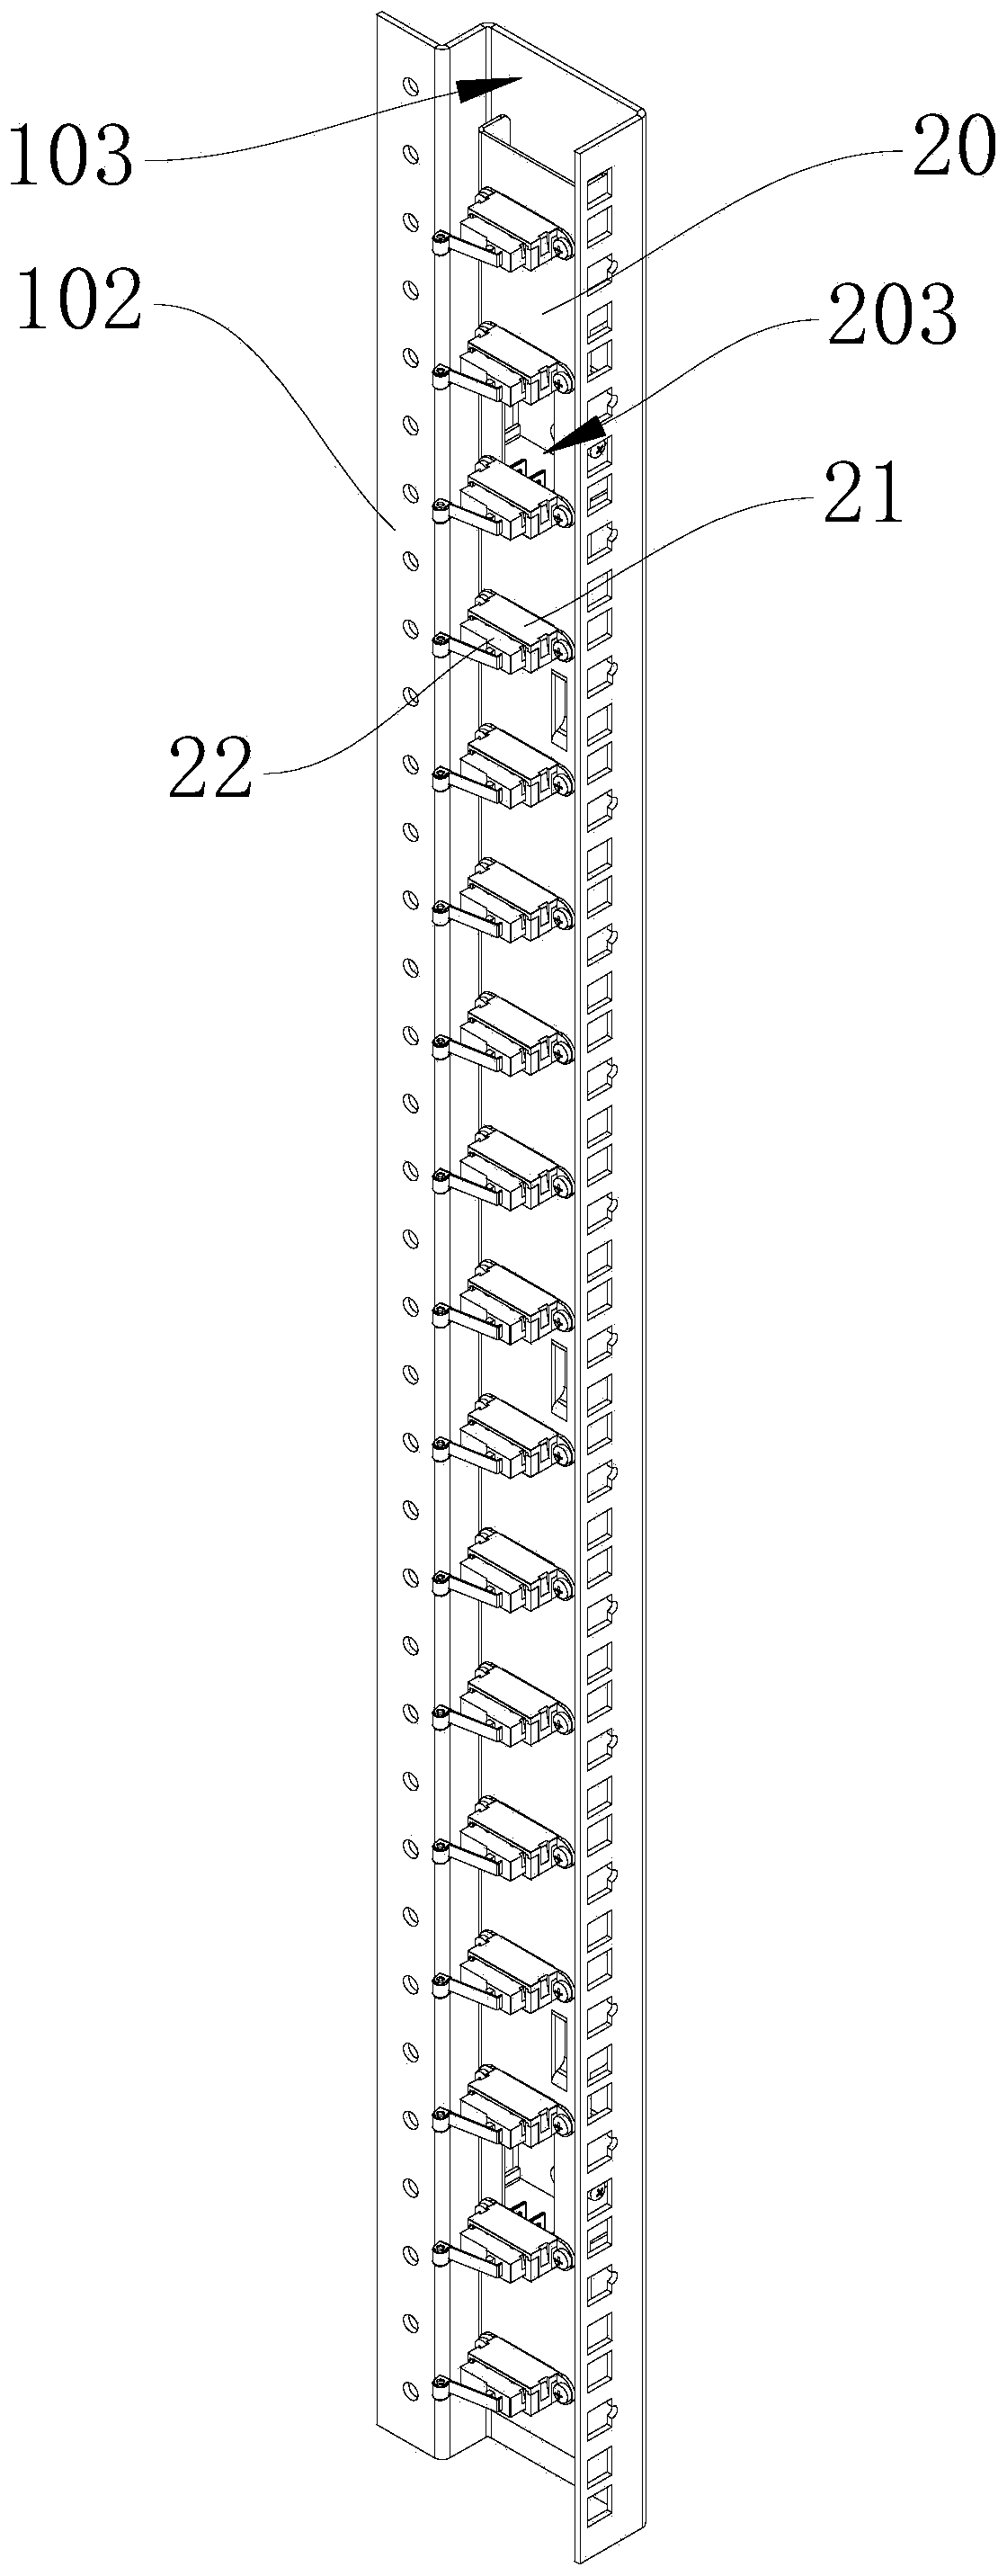 Monitoring cabinet, monitoring system and monitoring method based on cabinet space occupation detection